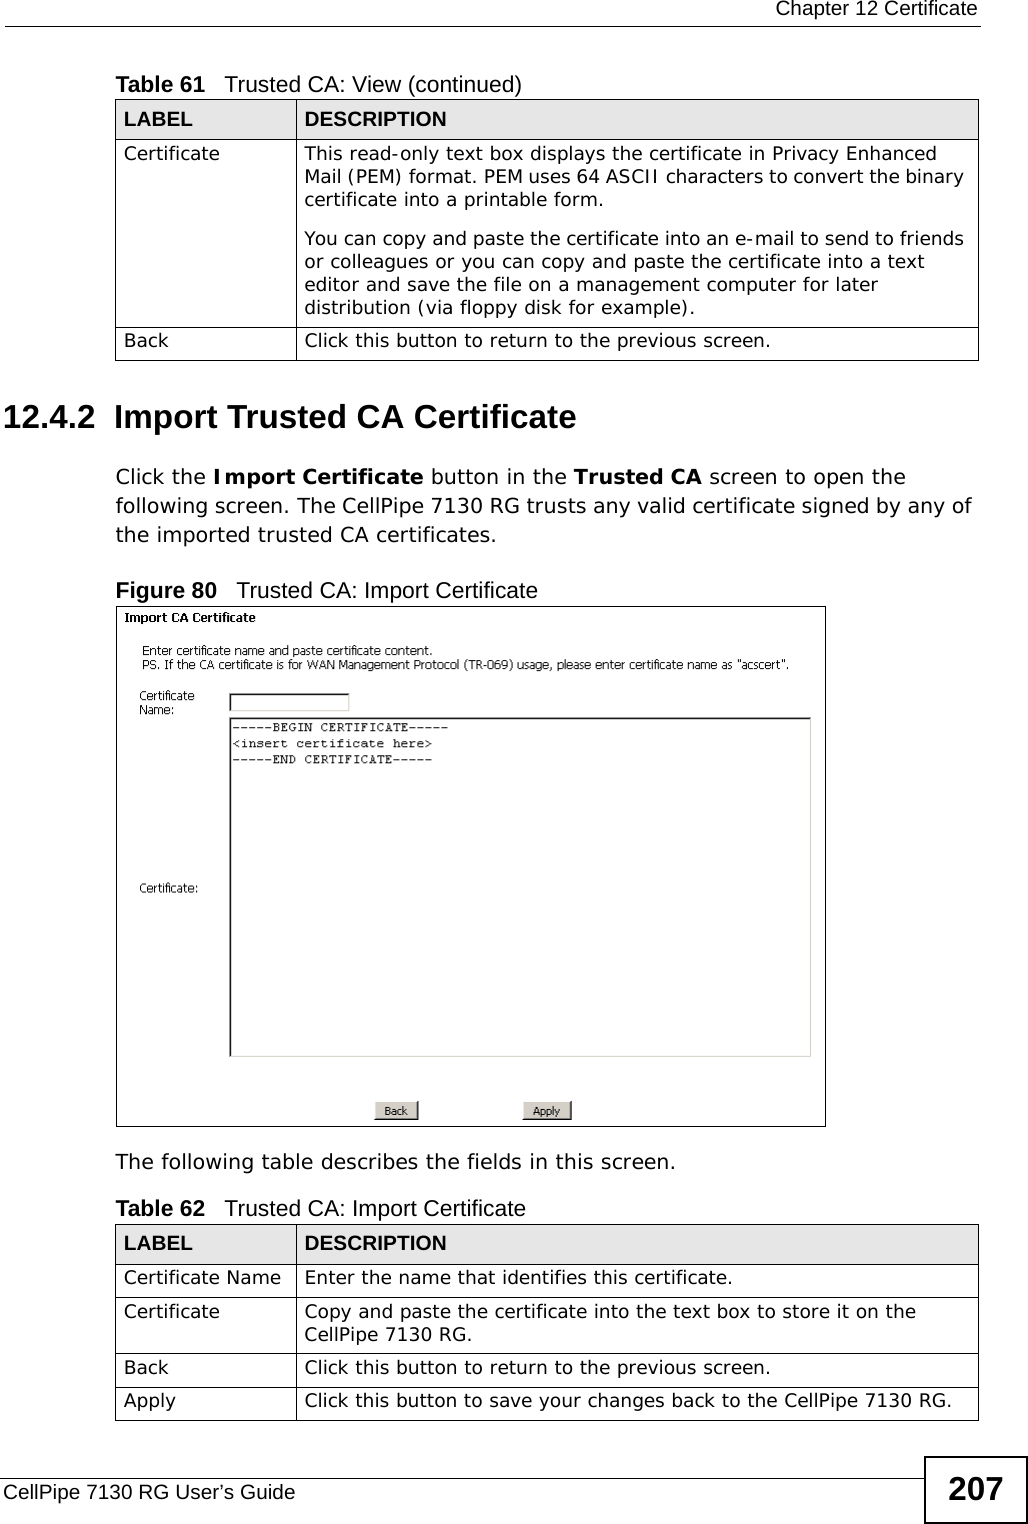  Chapter 12 CertificateCellPipe 7130 RG User’s Guide 20712.4.2  Import Trusted CA CertificateClick the Import Certificate button in the Trusted CA screen to open the following screen. The CellPipe 7130 RG trusts any valid certificate signed by any of the imported trusted CA certificates.Figure 80   Trusted CA: Import Certificate The following table describes the fields in this screen. Certificate This read-only text box displays the certificate in Privacy Enhanced Mail (PEM) format. PEM uses 64 ASCII characters to convert the binary certificate into a printable form. You can copy and paste the certificate into an e-mail to send to friends or colleagues or you can copy and paste the certificate into a text editor and save the file on a management computer for later distribution (via floppy disk for example).Back Click this button to return to the previous screen.Table 61   Trusted CA: View (continued)LABEL DESCRIPTIONTable 62   Trusted CA: Import CertificateLABEL DESCRIPTIONCertificate Name Enter the name that identifies this certificate. Certificate Copy and paste the certificate into the text box to store it on the CellPipe 7130 RG.Back Click this button to return to the previous screen.Apply Click this button to save your changes back to the CellPipe 7130 RG.